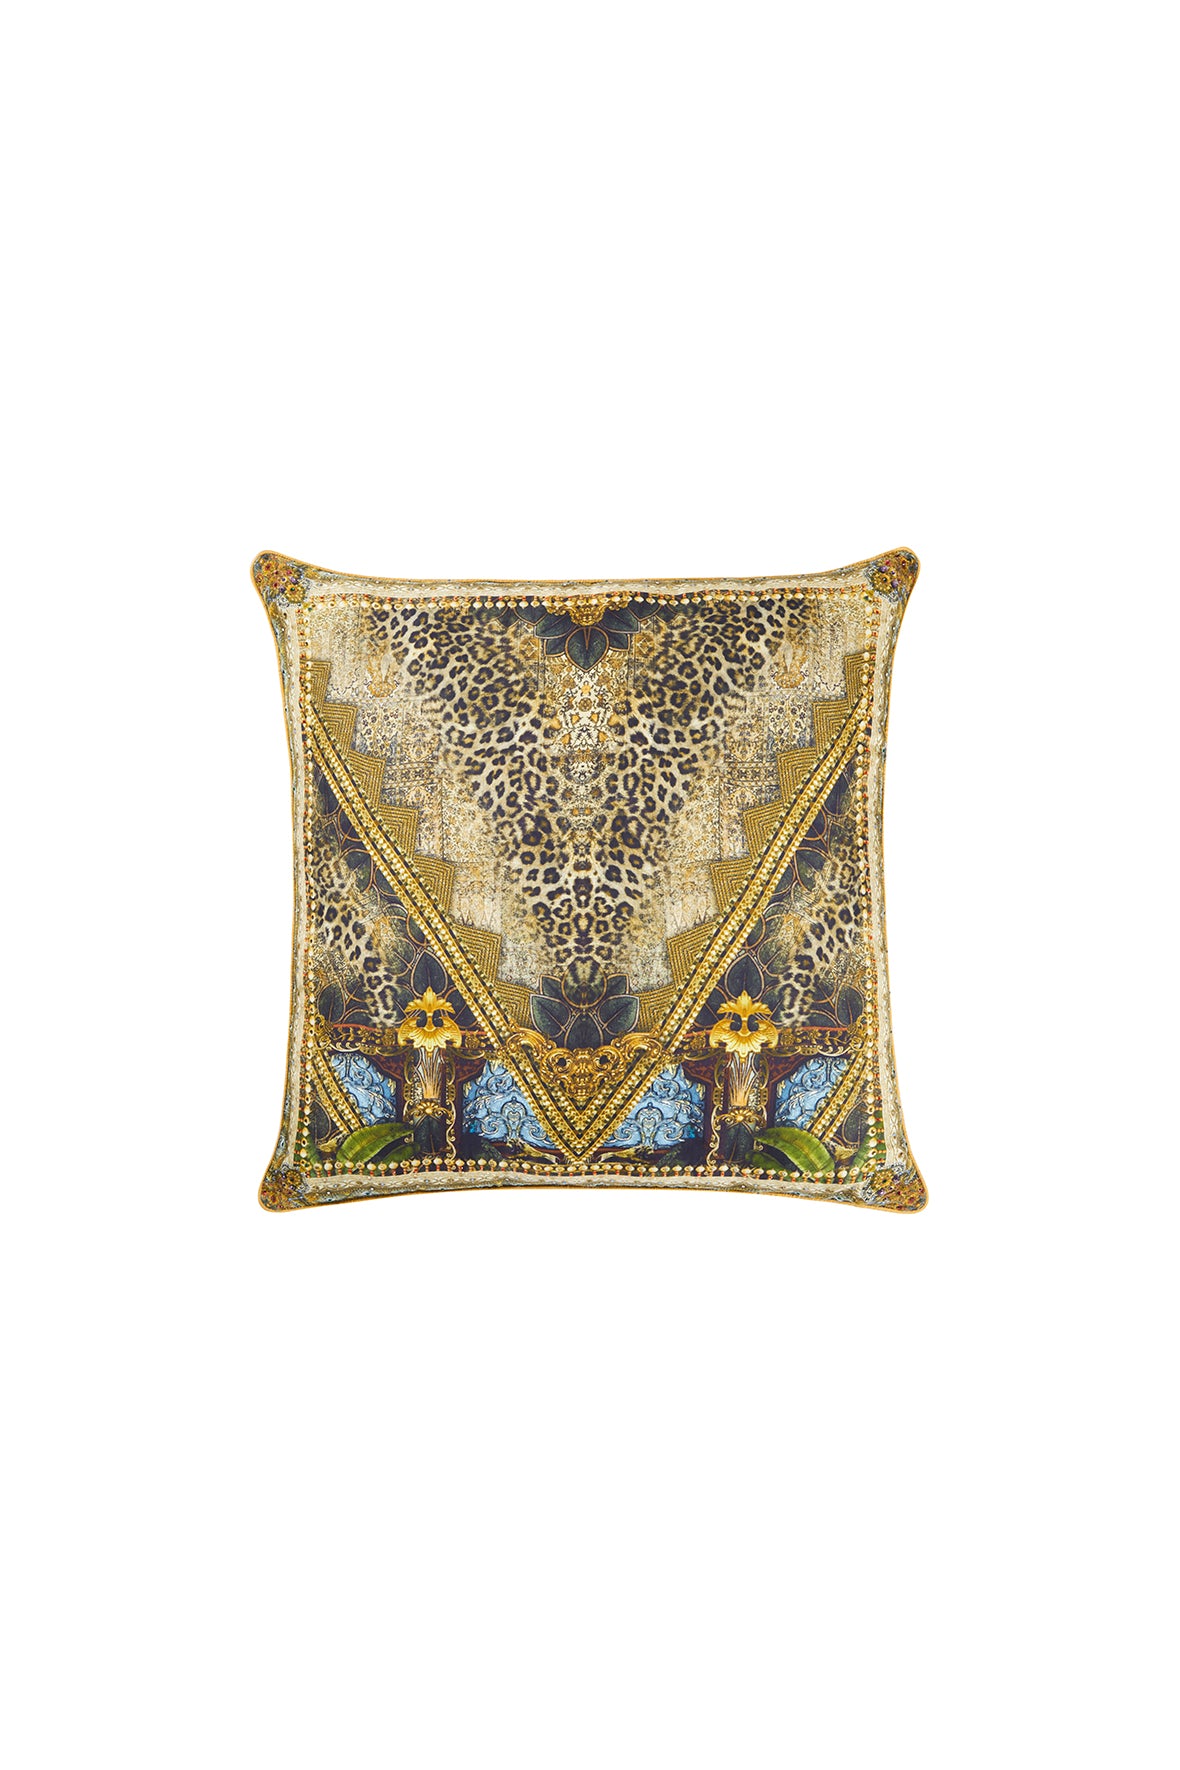 THE GYPSY LOUNGE SMALL SQUARE CUSHION